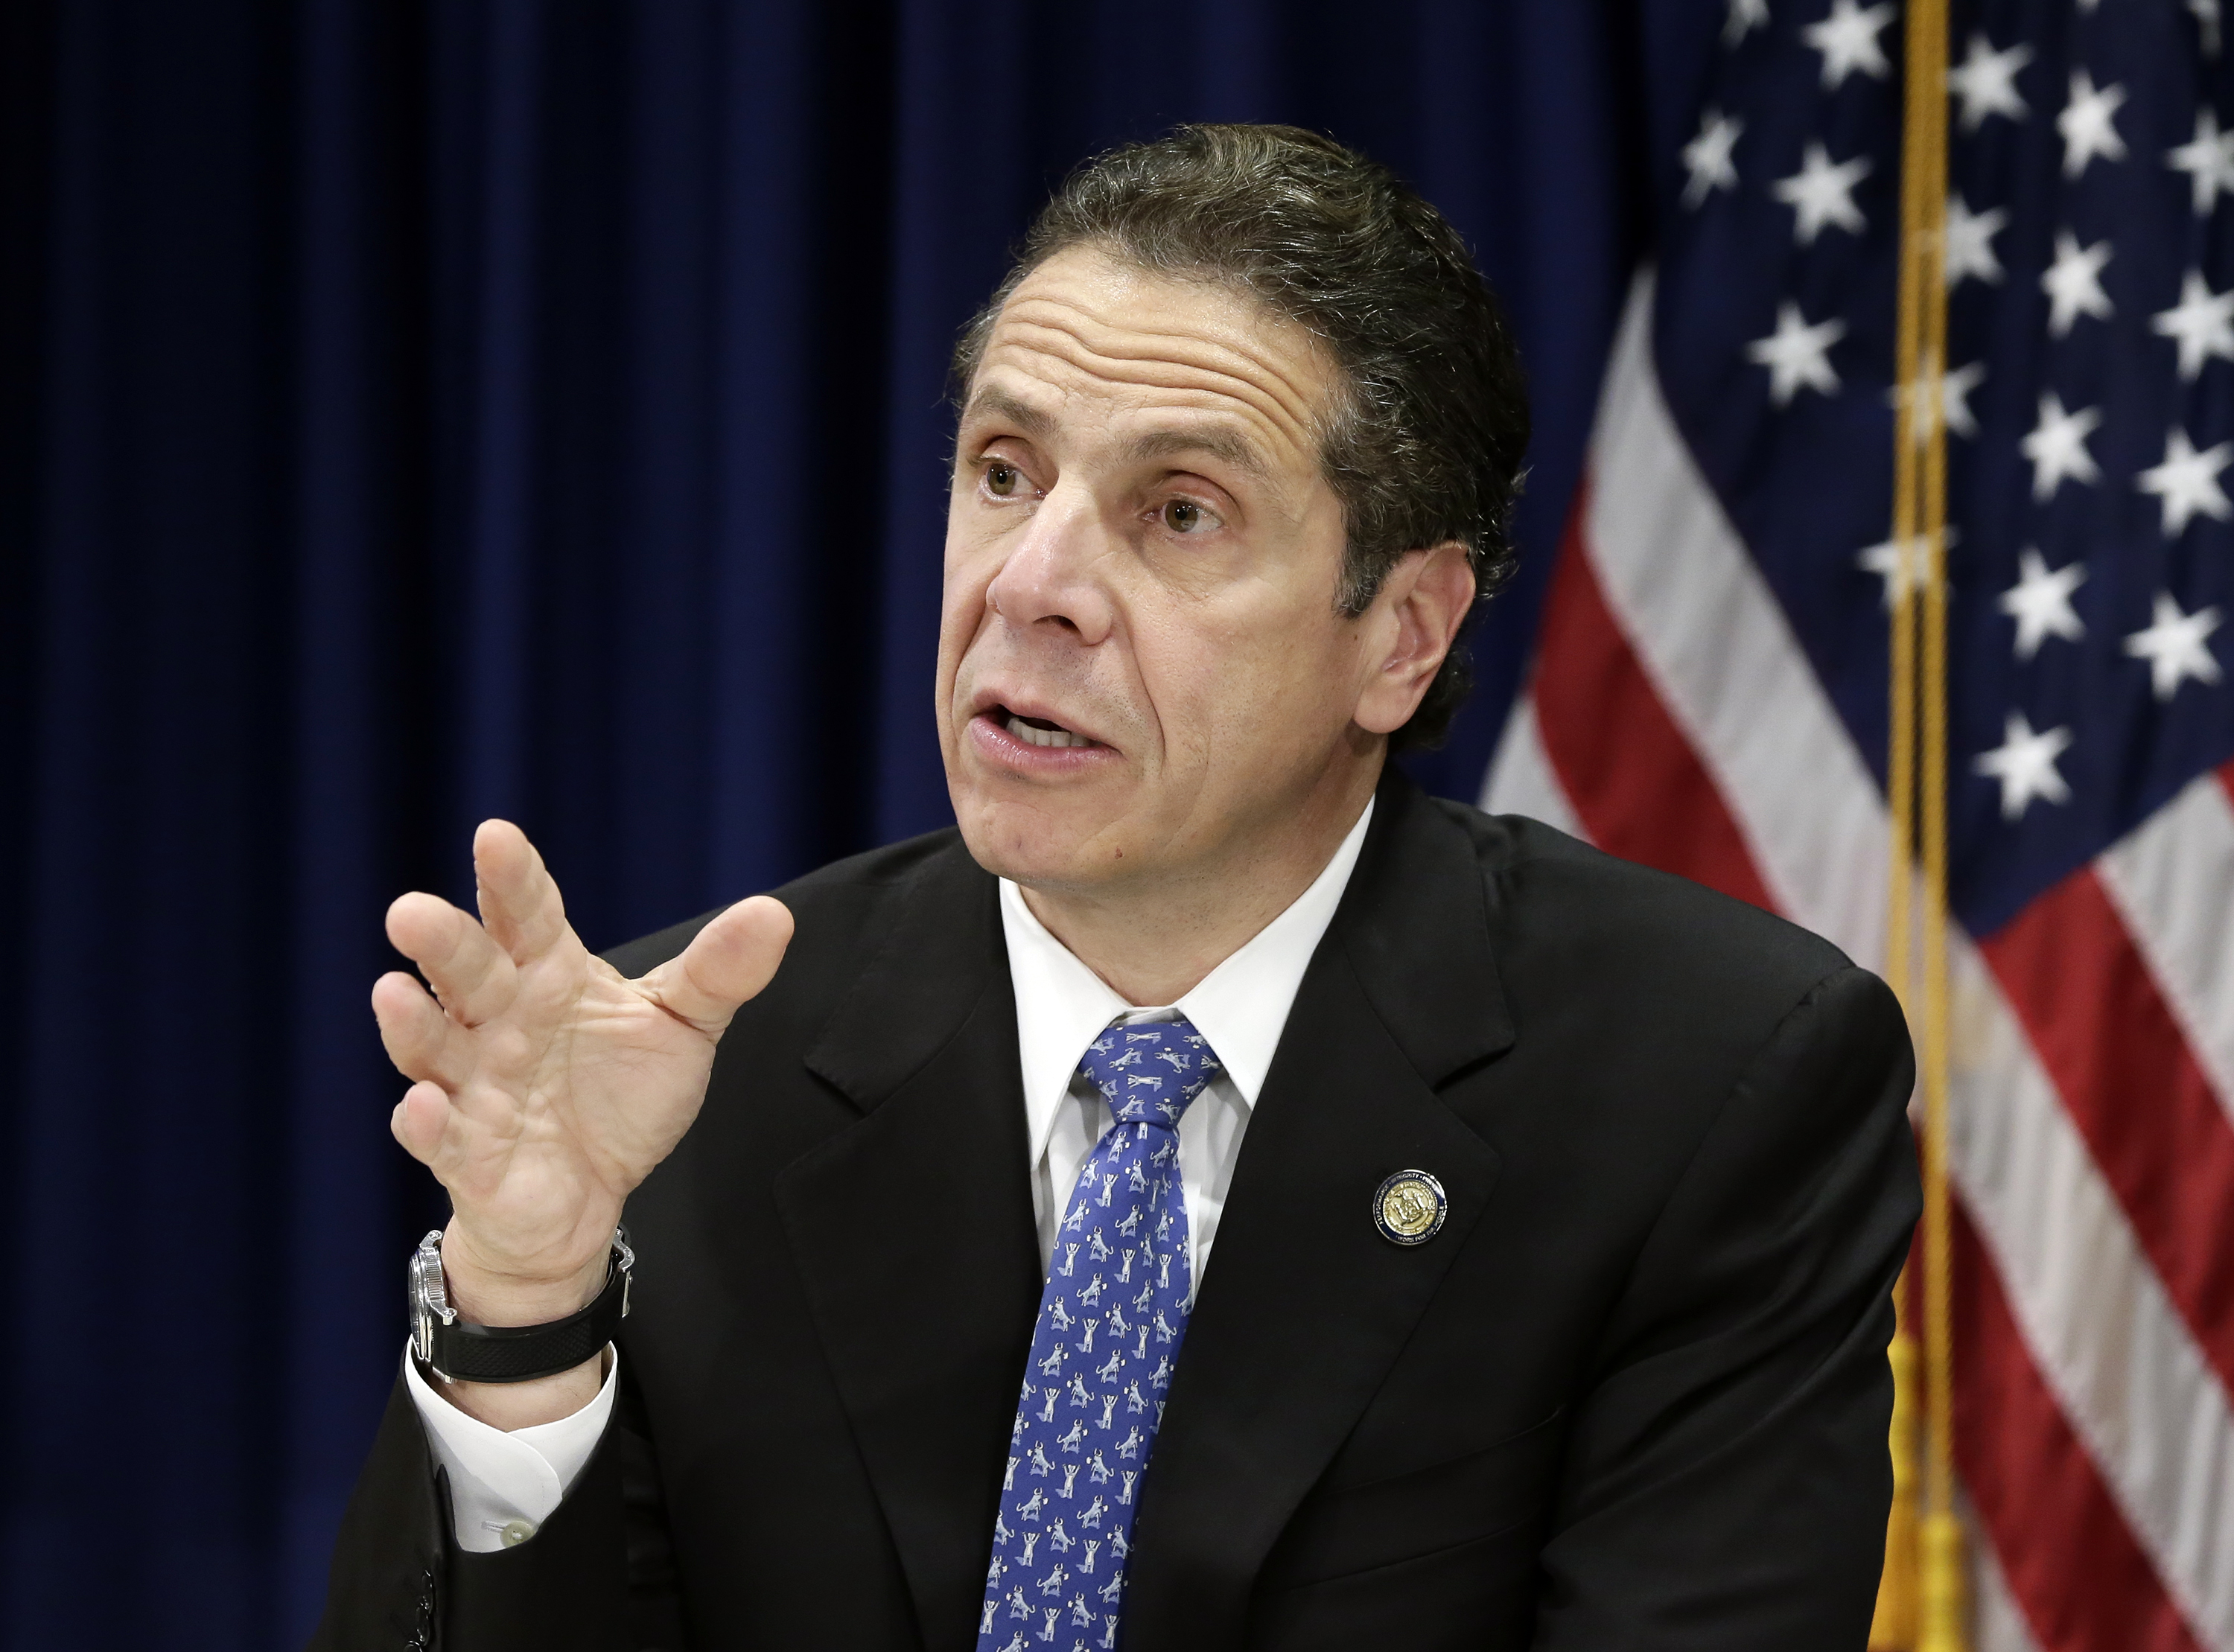 Governor Andrew Cuomo speaks during a press conference on the status of Ebola patient Doctor Craig Spencer and New York's new Ebola policies at the governor's office in New York on Oct. 26, 2014 (Jason Szenes—EPA)